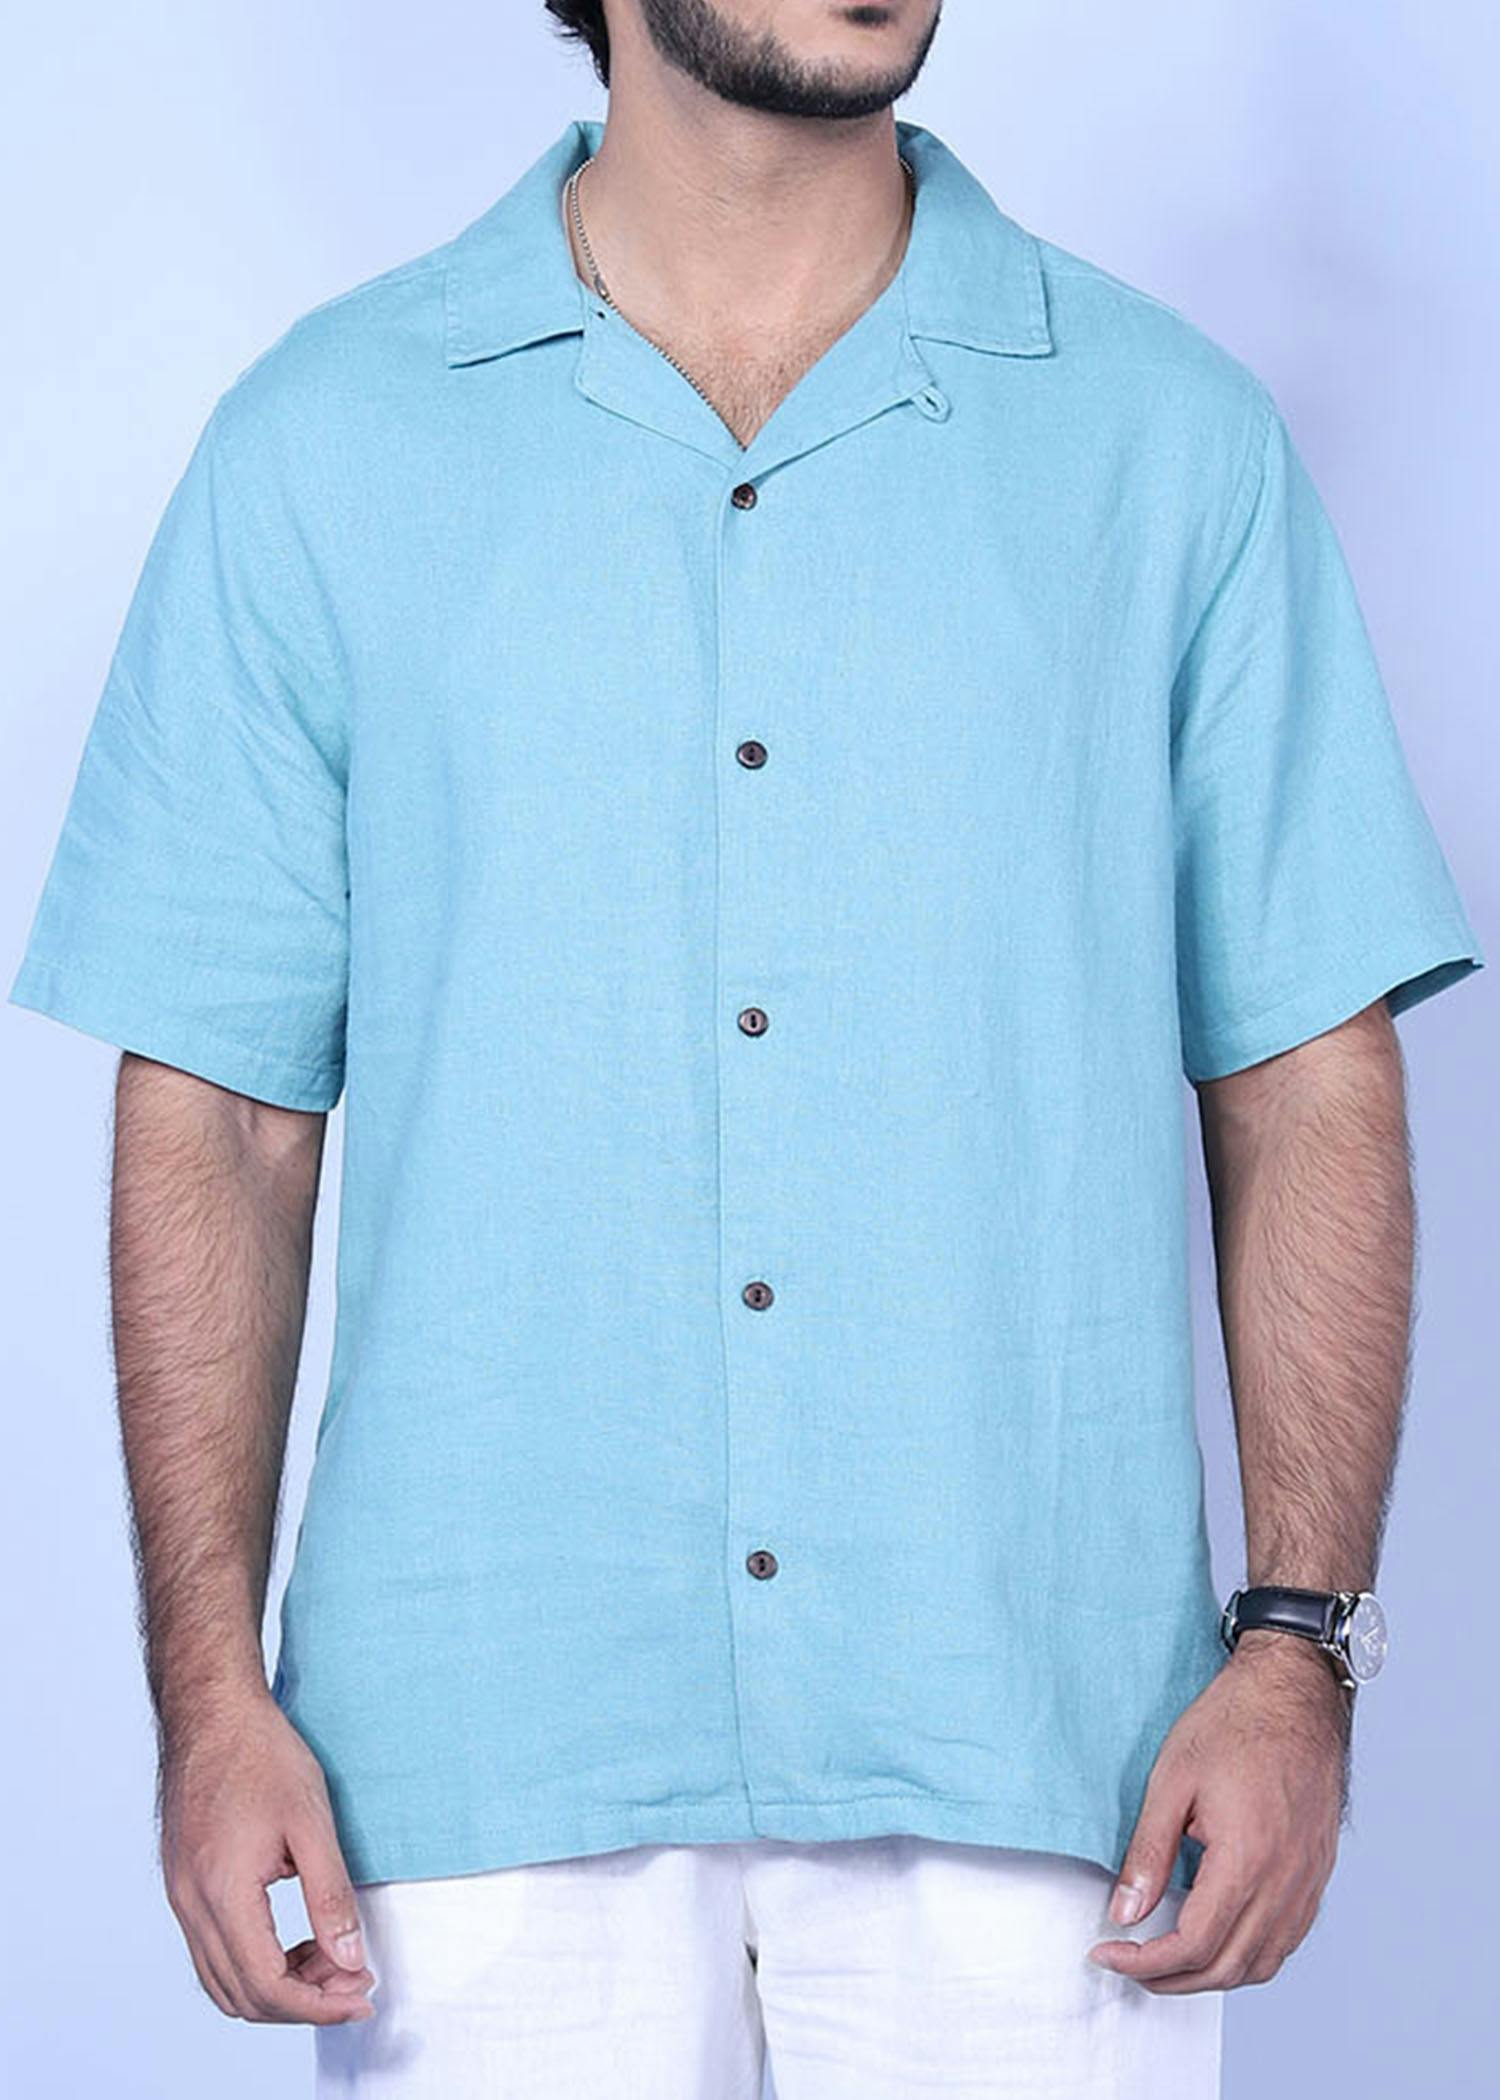 tommy hs shirt sea green color facecropped